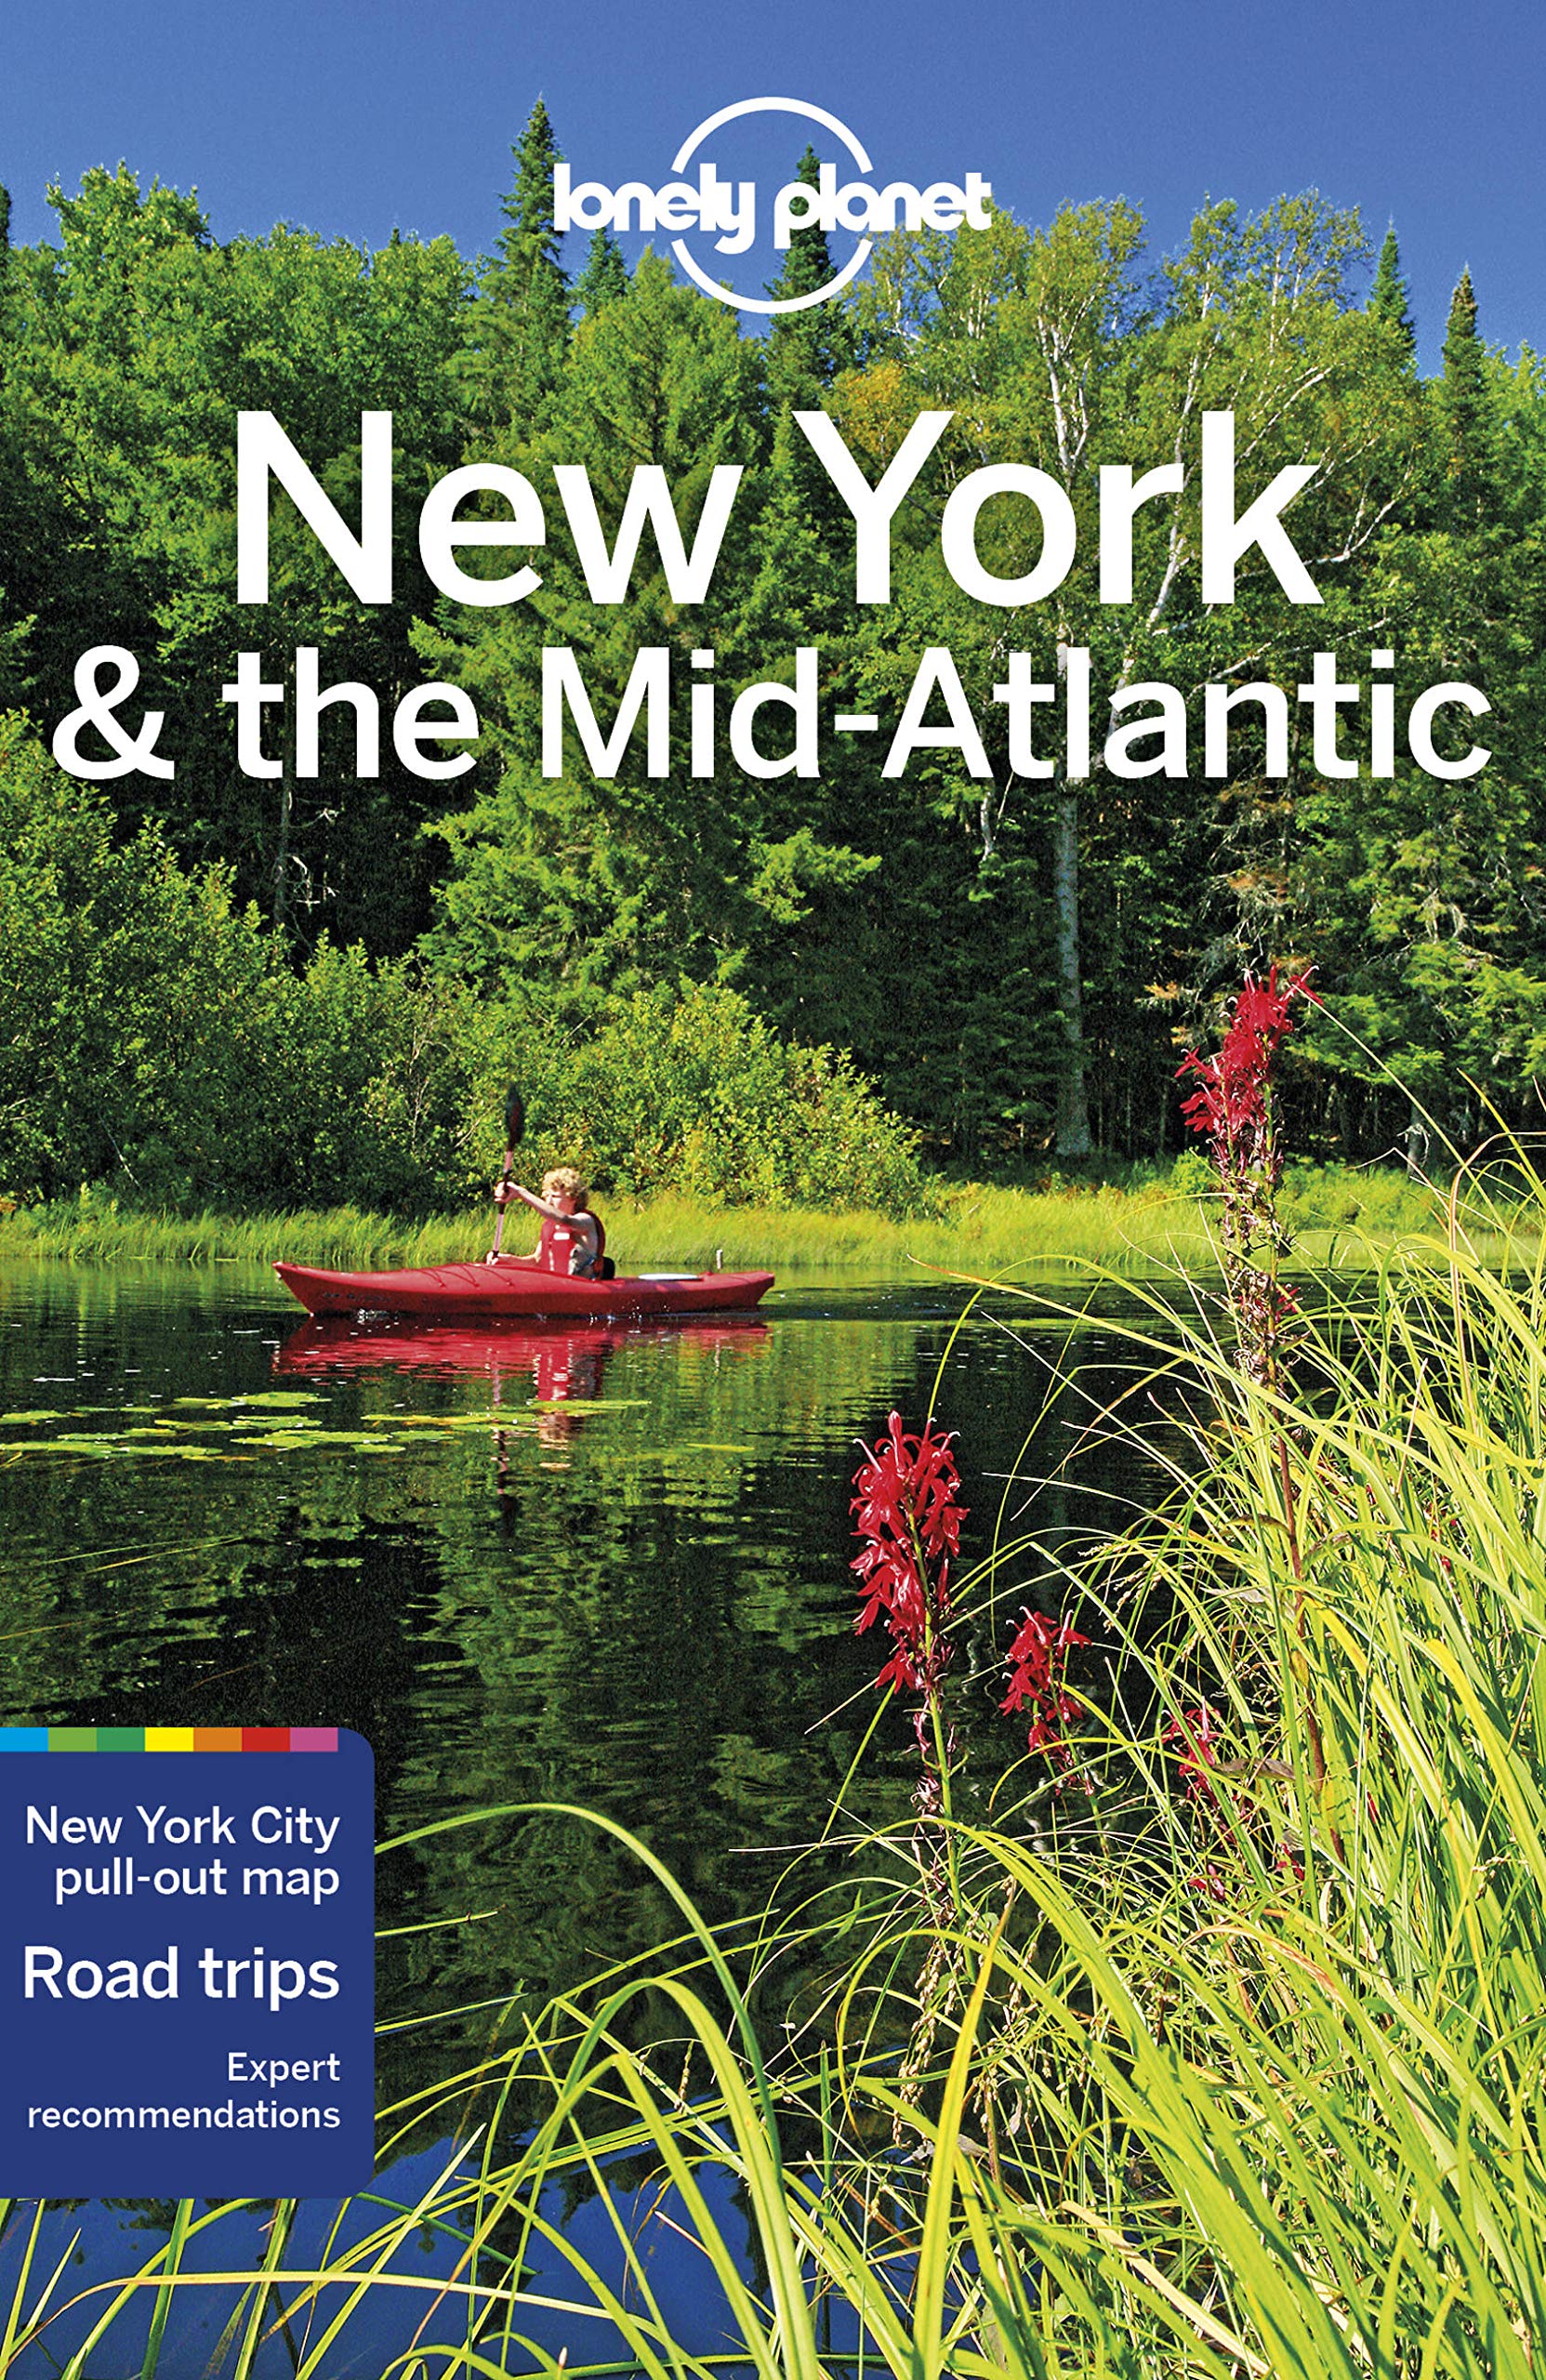 Lonely Planet New York & the Mid-Atlantic (Regional Guide)